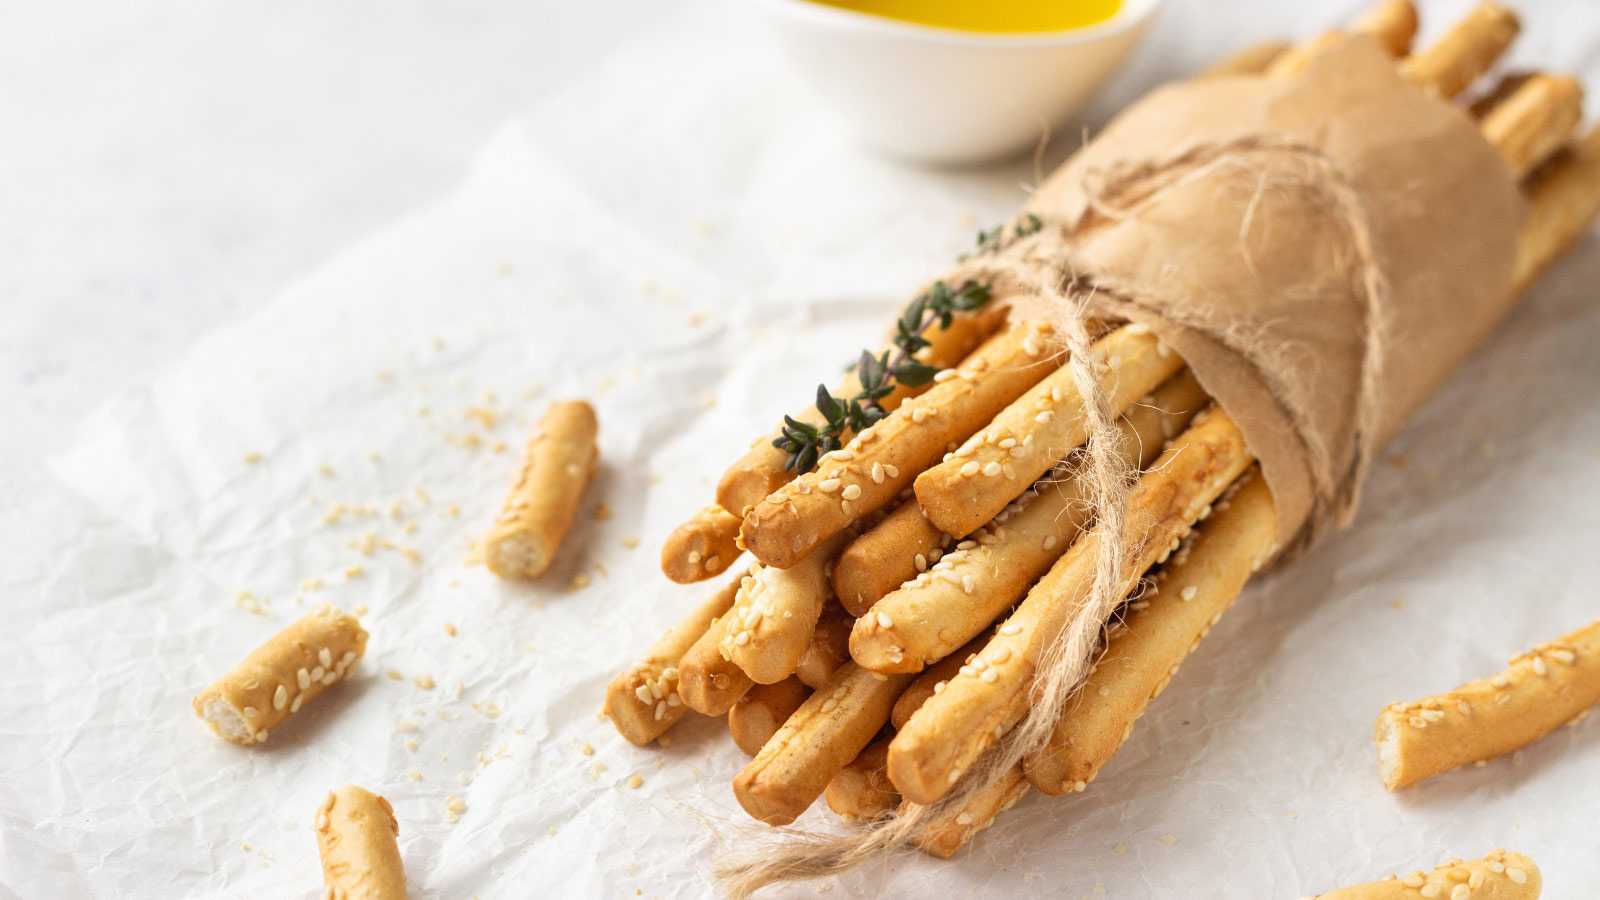 <p>These easy-to-make, healthy, and delicious<a href="https://www.thegraciouspantry.com/clean-eating-bread-sticks/"> bread sticks</a> make an excellent road trip snack. They are savory, crunchy, and tasty. You can eat them by themselves or dip them in your favorite sauces. </p>